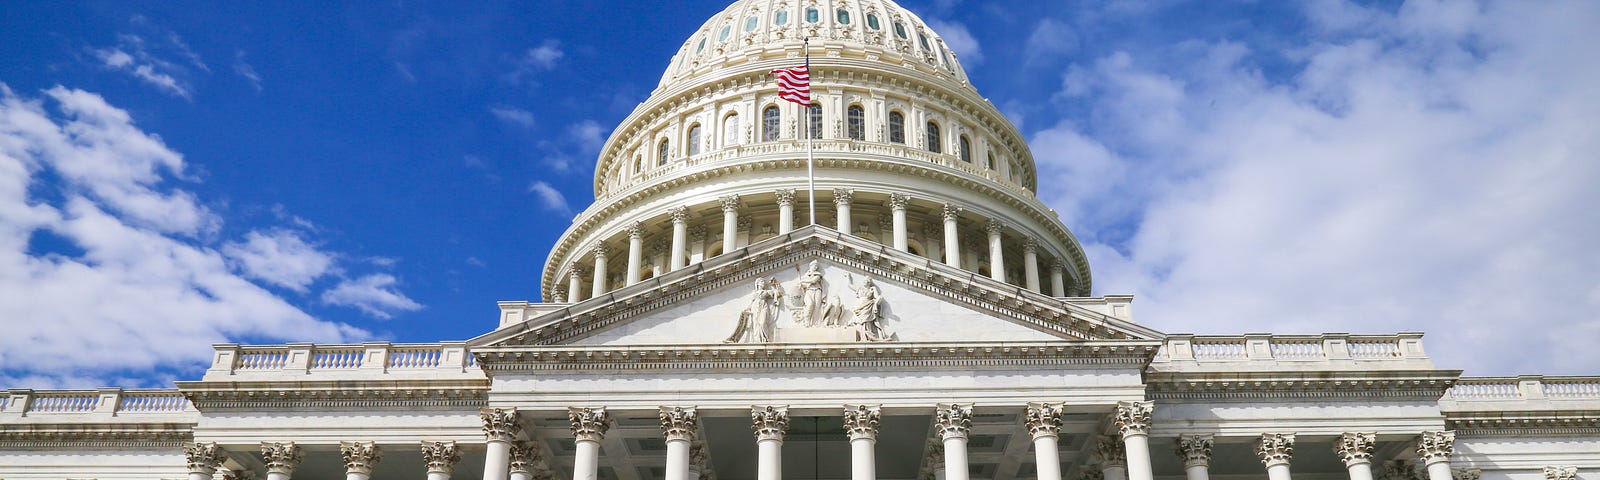 An image of the US capitol building.